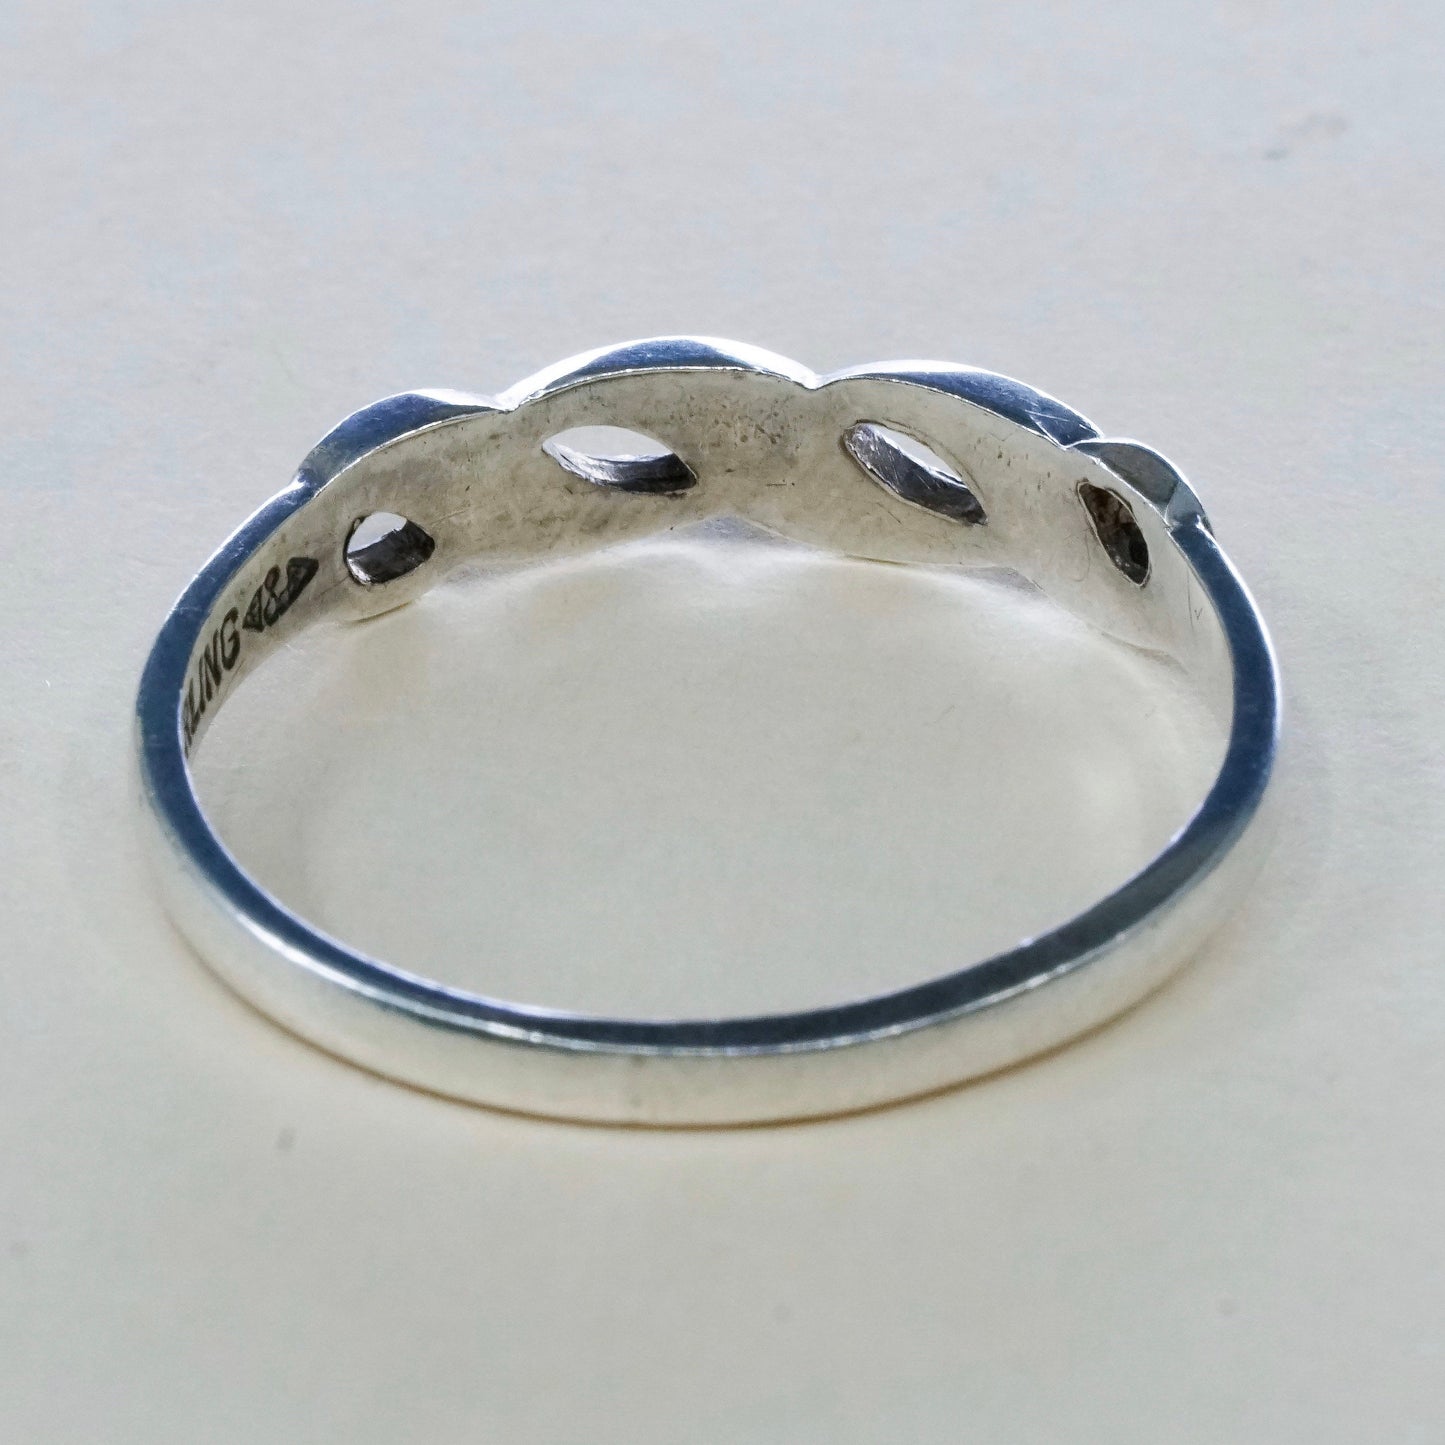 Size 9.75, Vintage Clark & Coombs Sterling silver handmade ring, 925 band